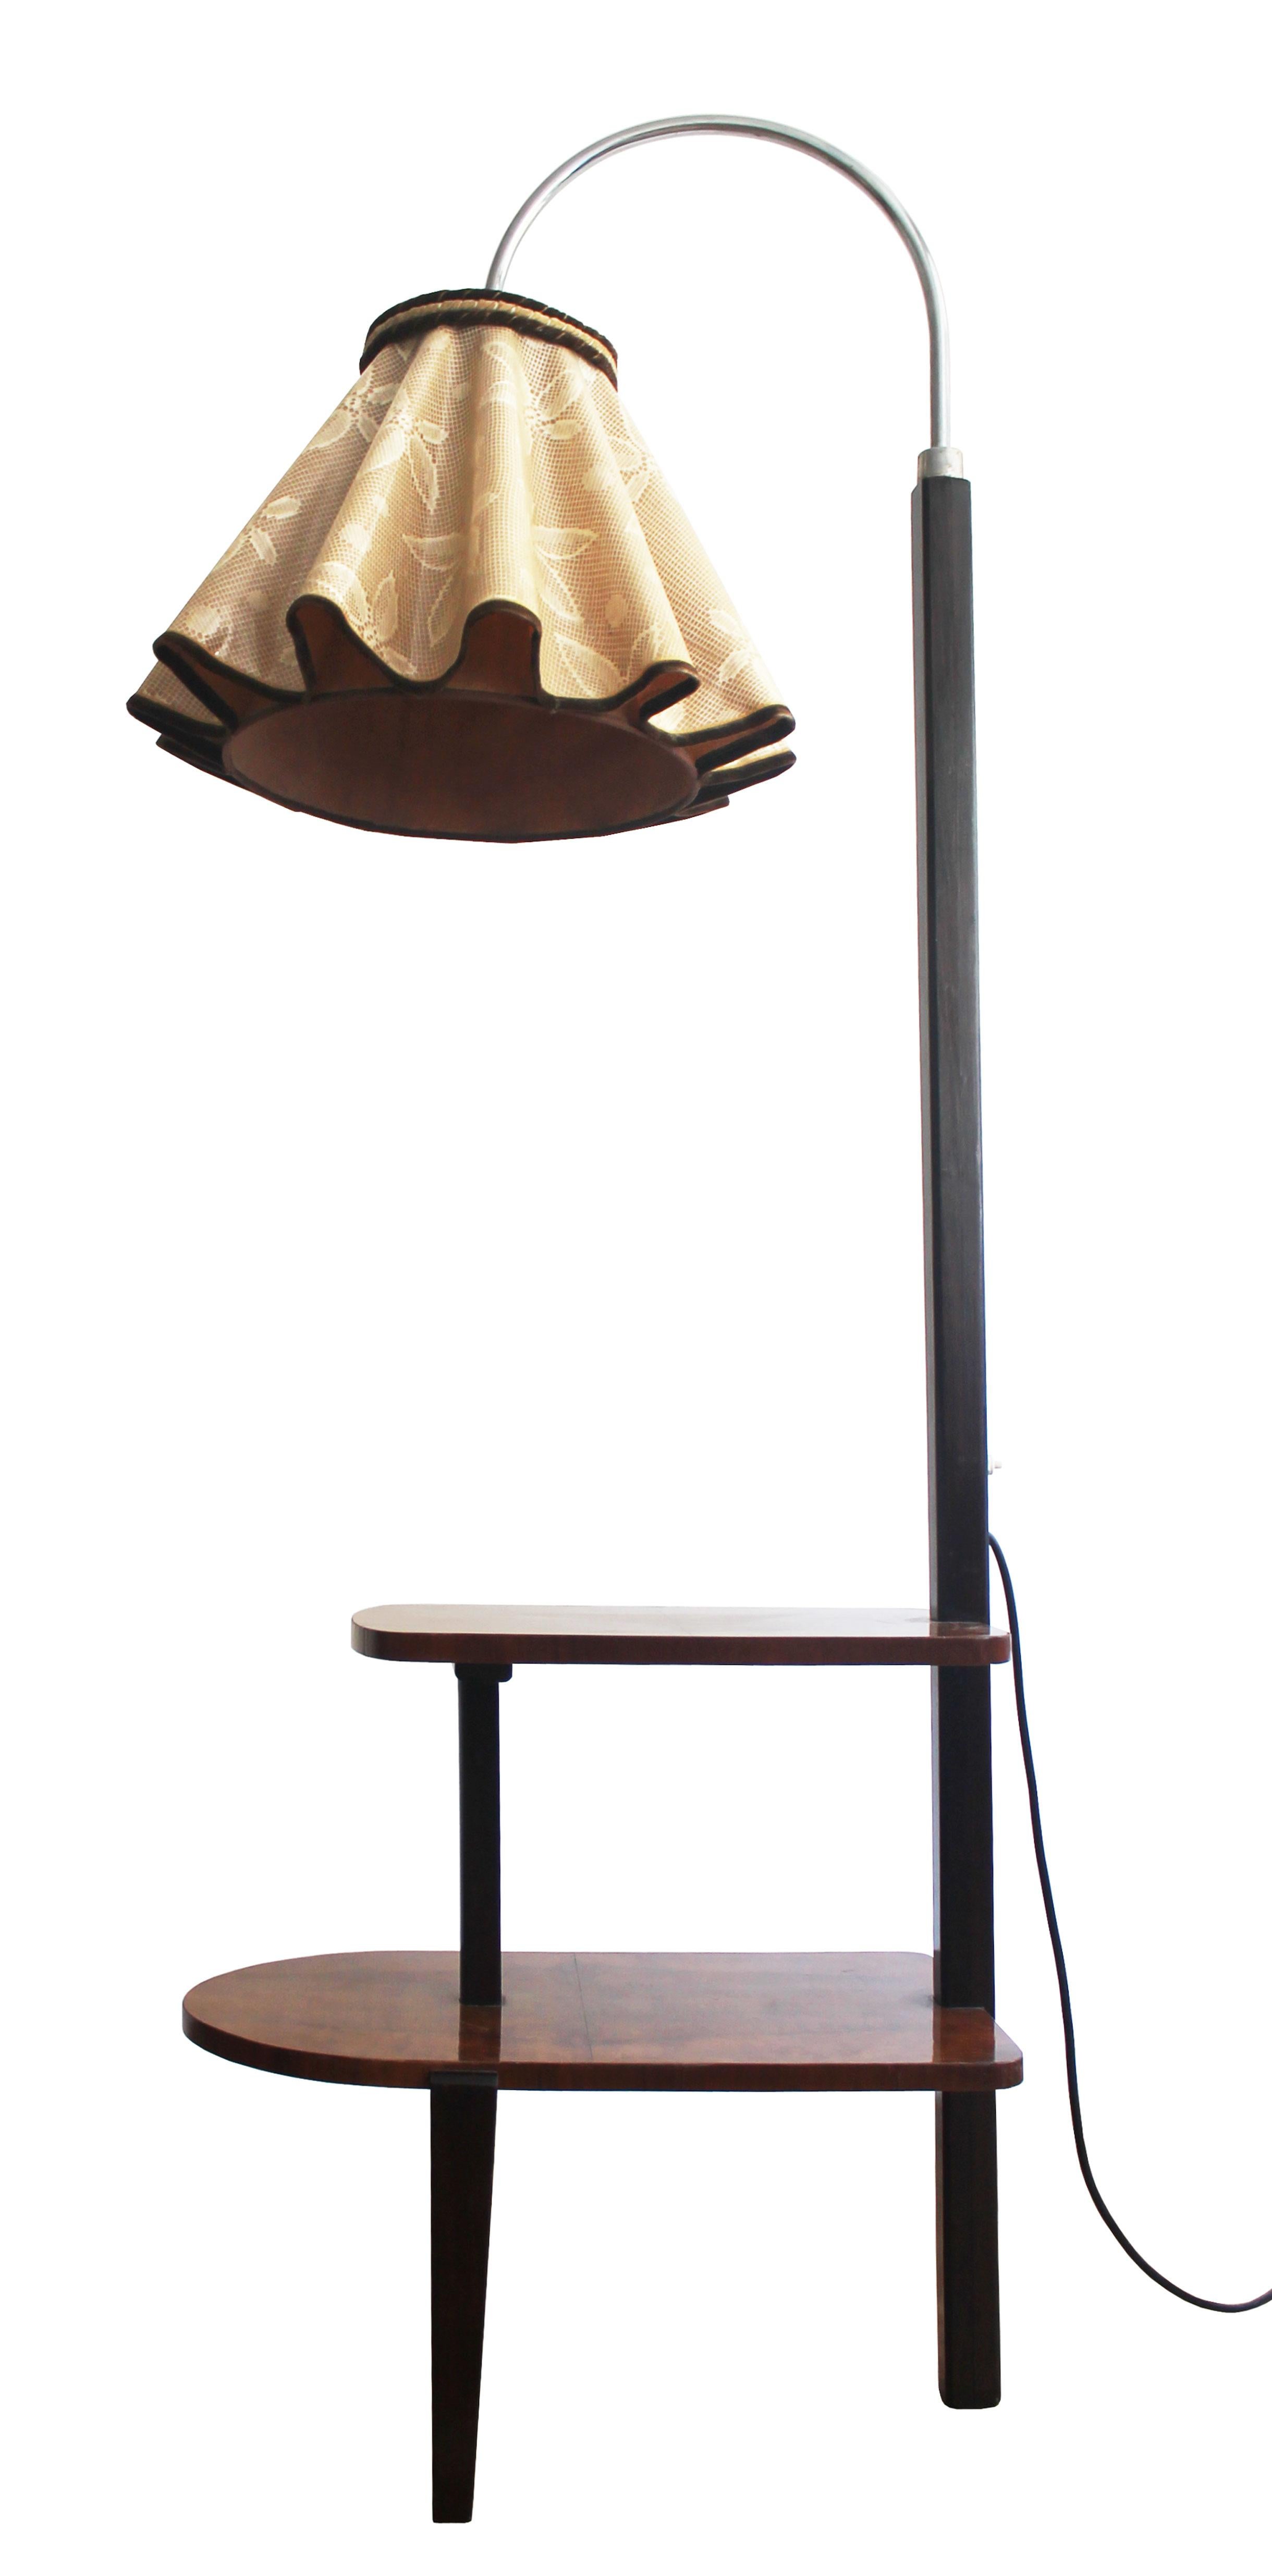 Mid-20th Century Art Deco Floor Lamp by Jindrich Halabala for UP Brno